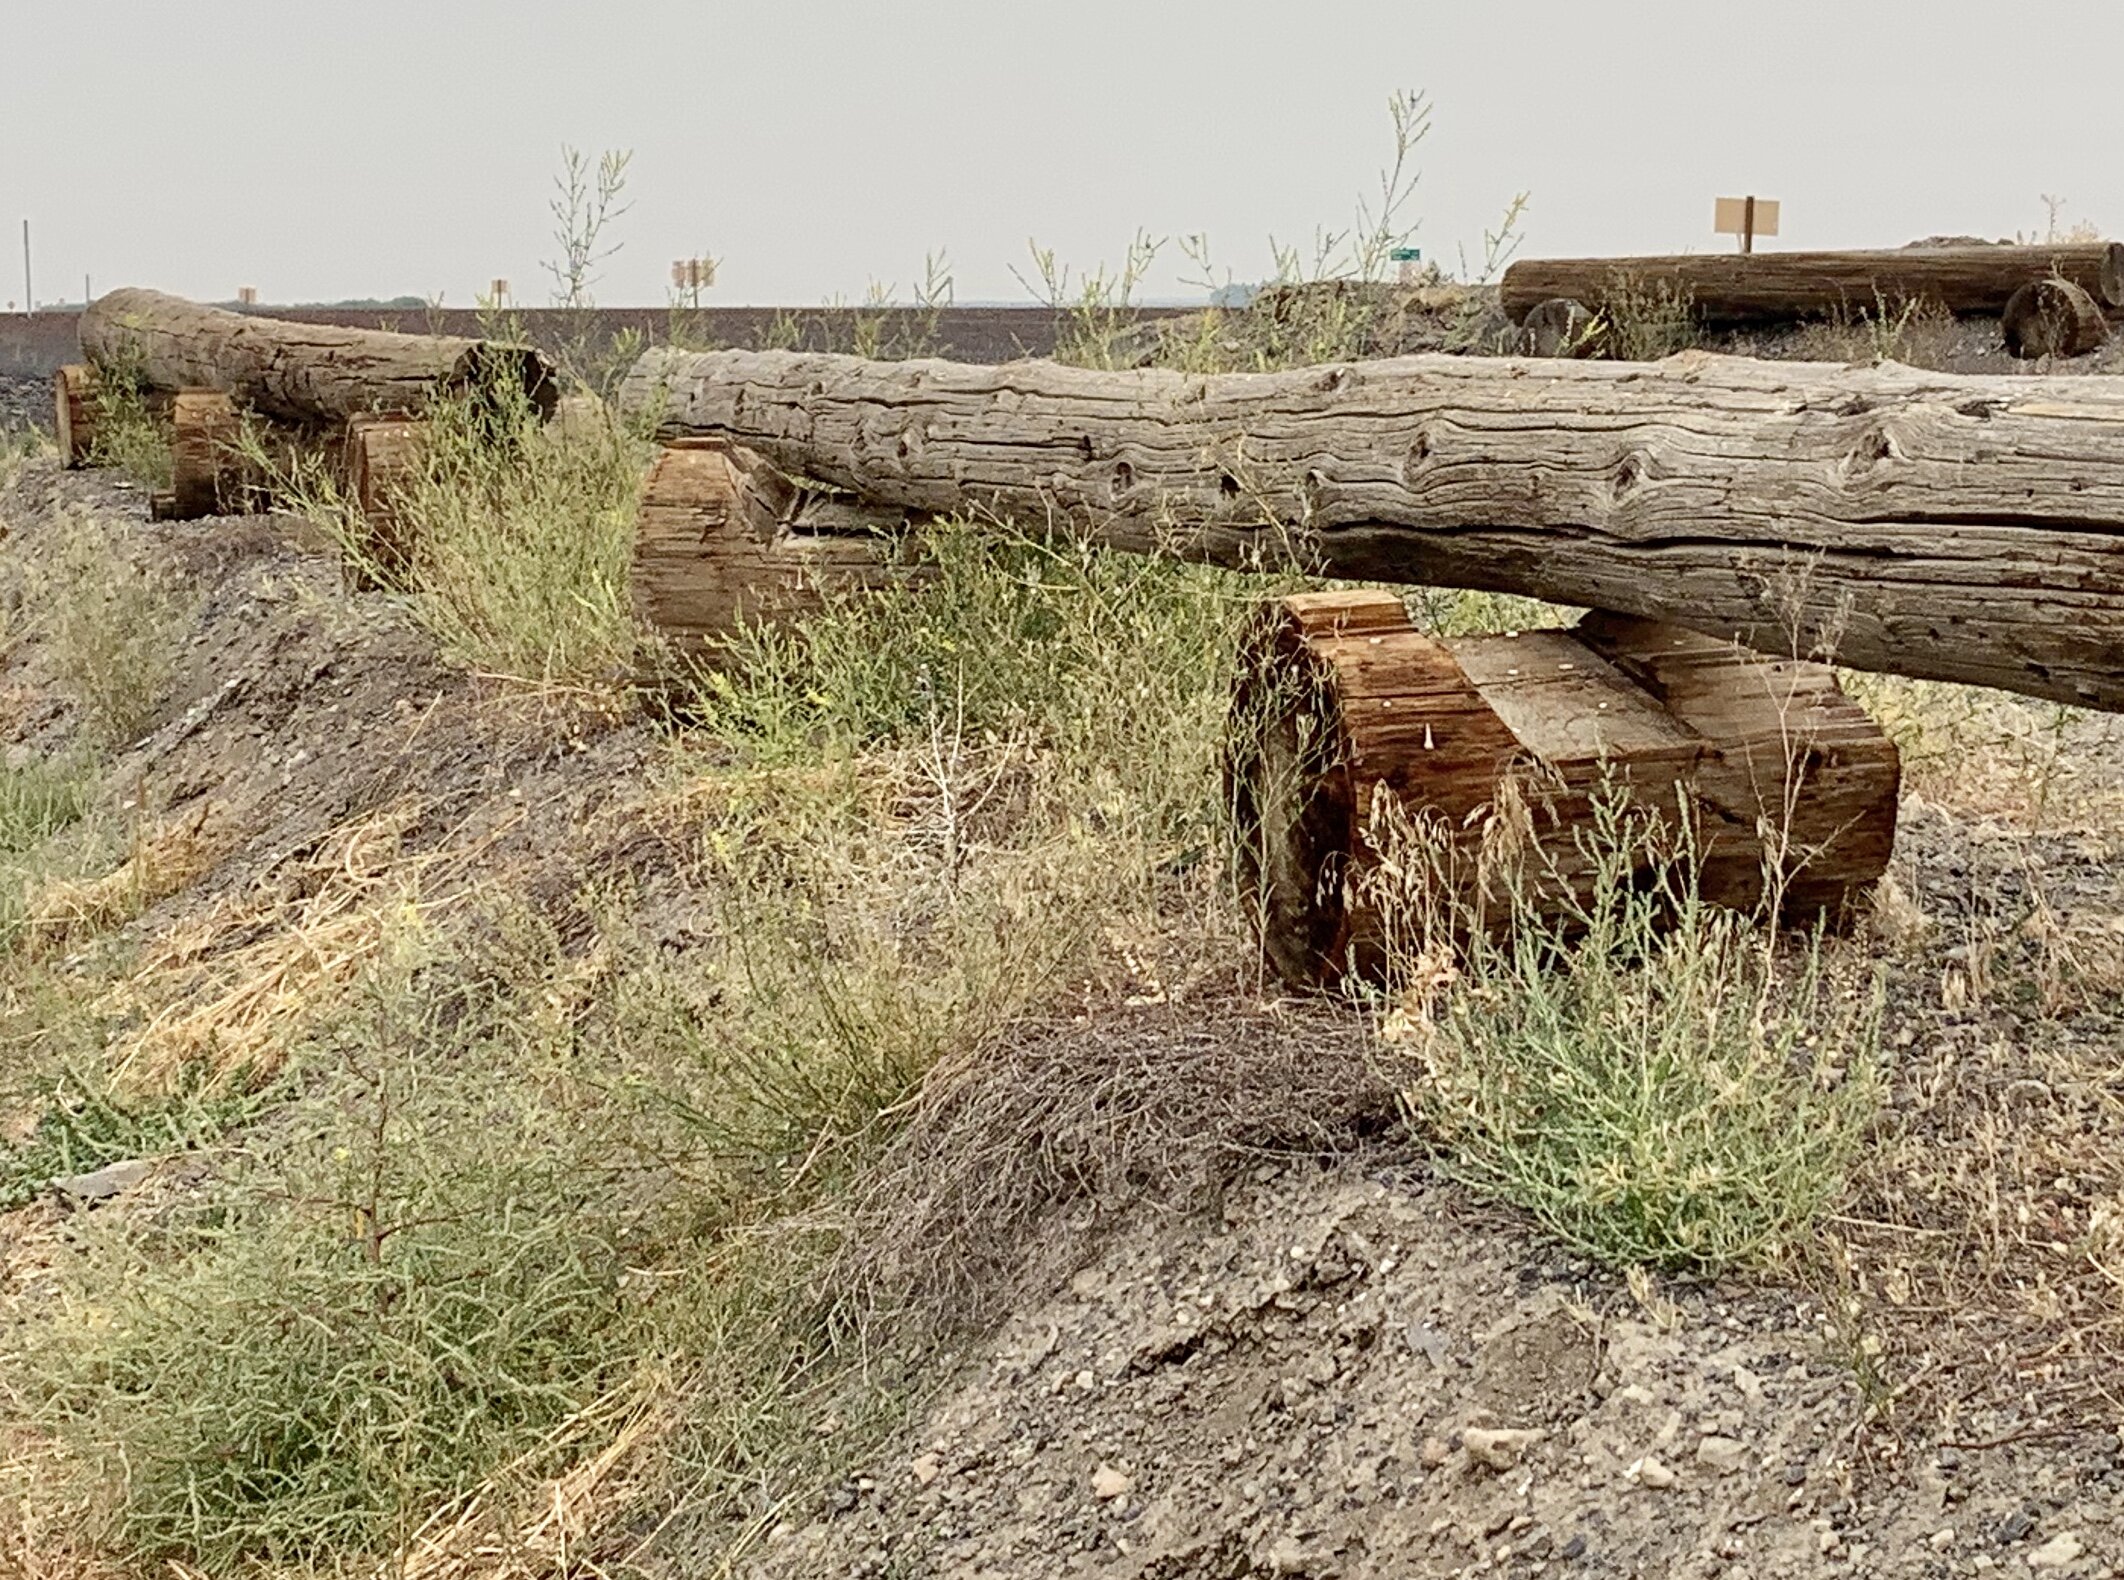  There’s not much to look at while out in the desert for hours. Perhaps that is the reason I was so impressed with these real-life Lincoln Logs alongside the road. 😄 